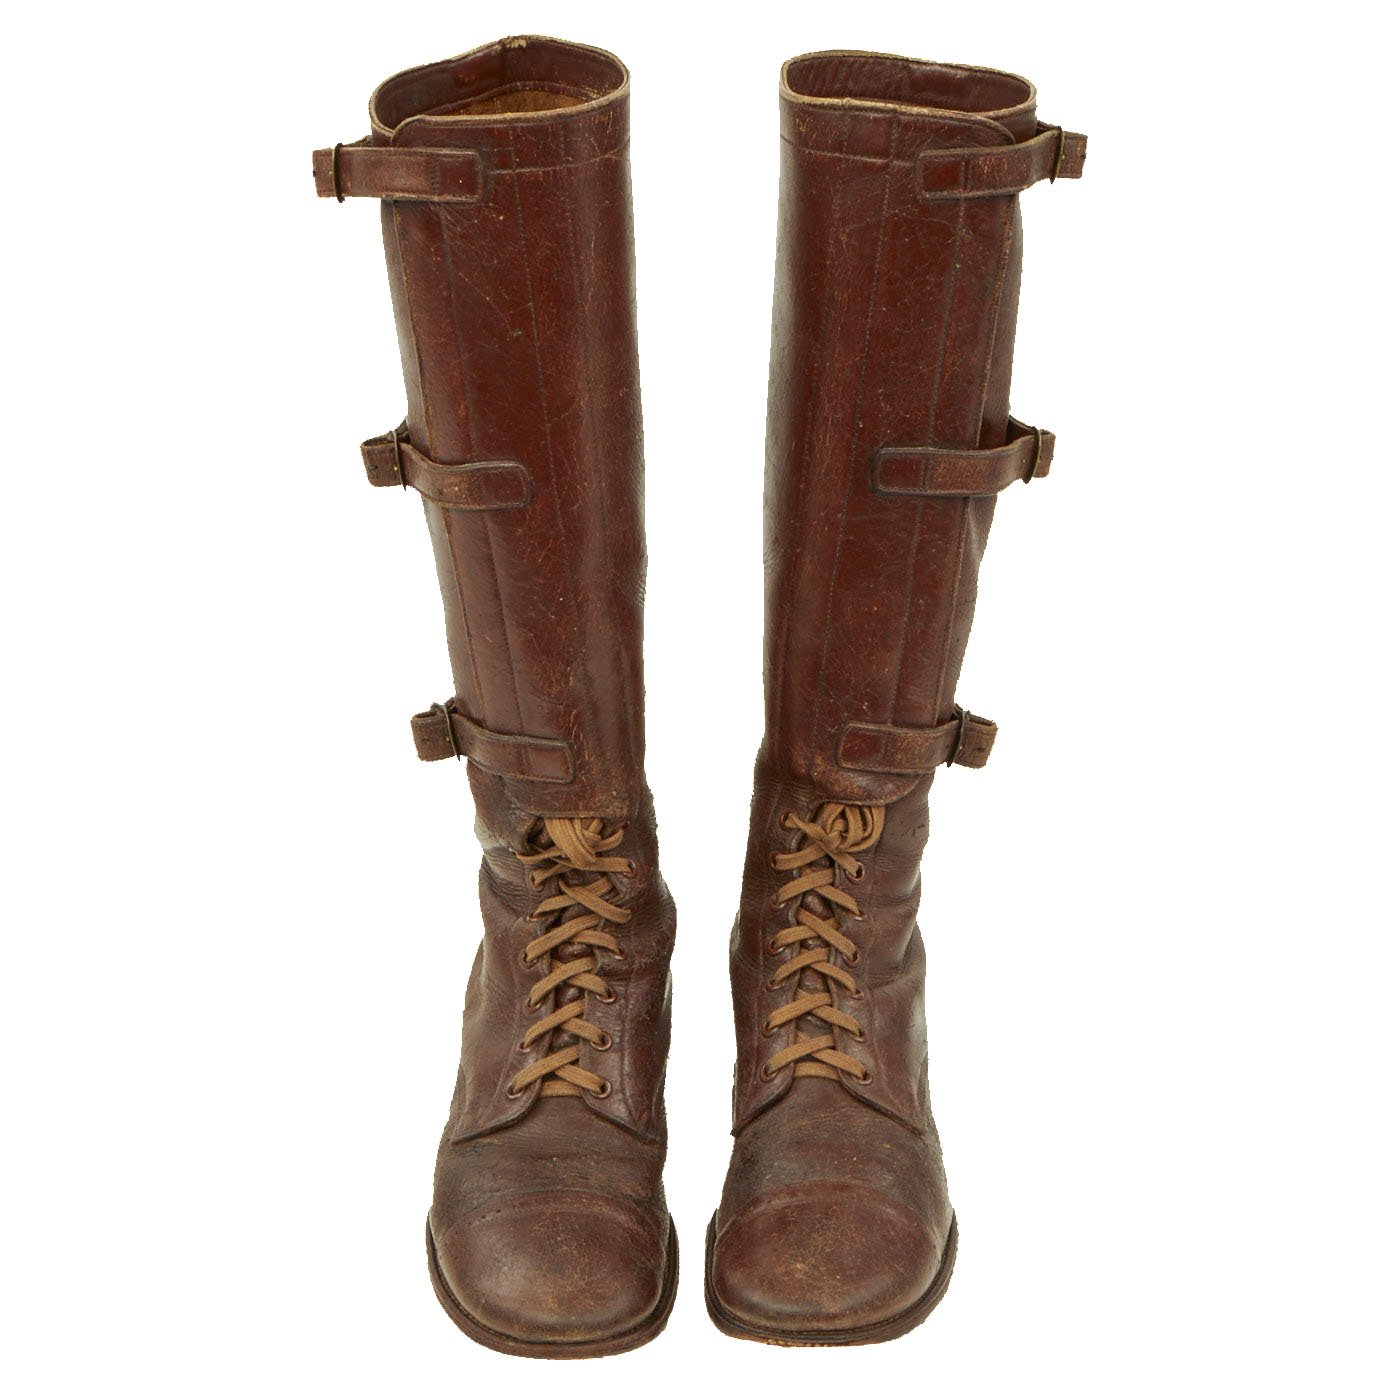 Original U.S. WWII Army Cavalry Three-Buckle Riding Boots - As Seen In ...